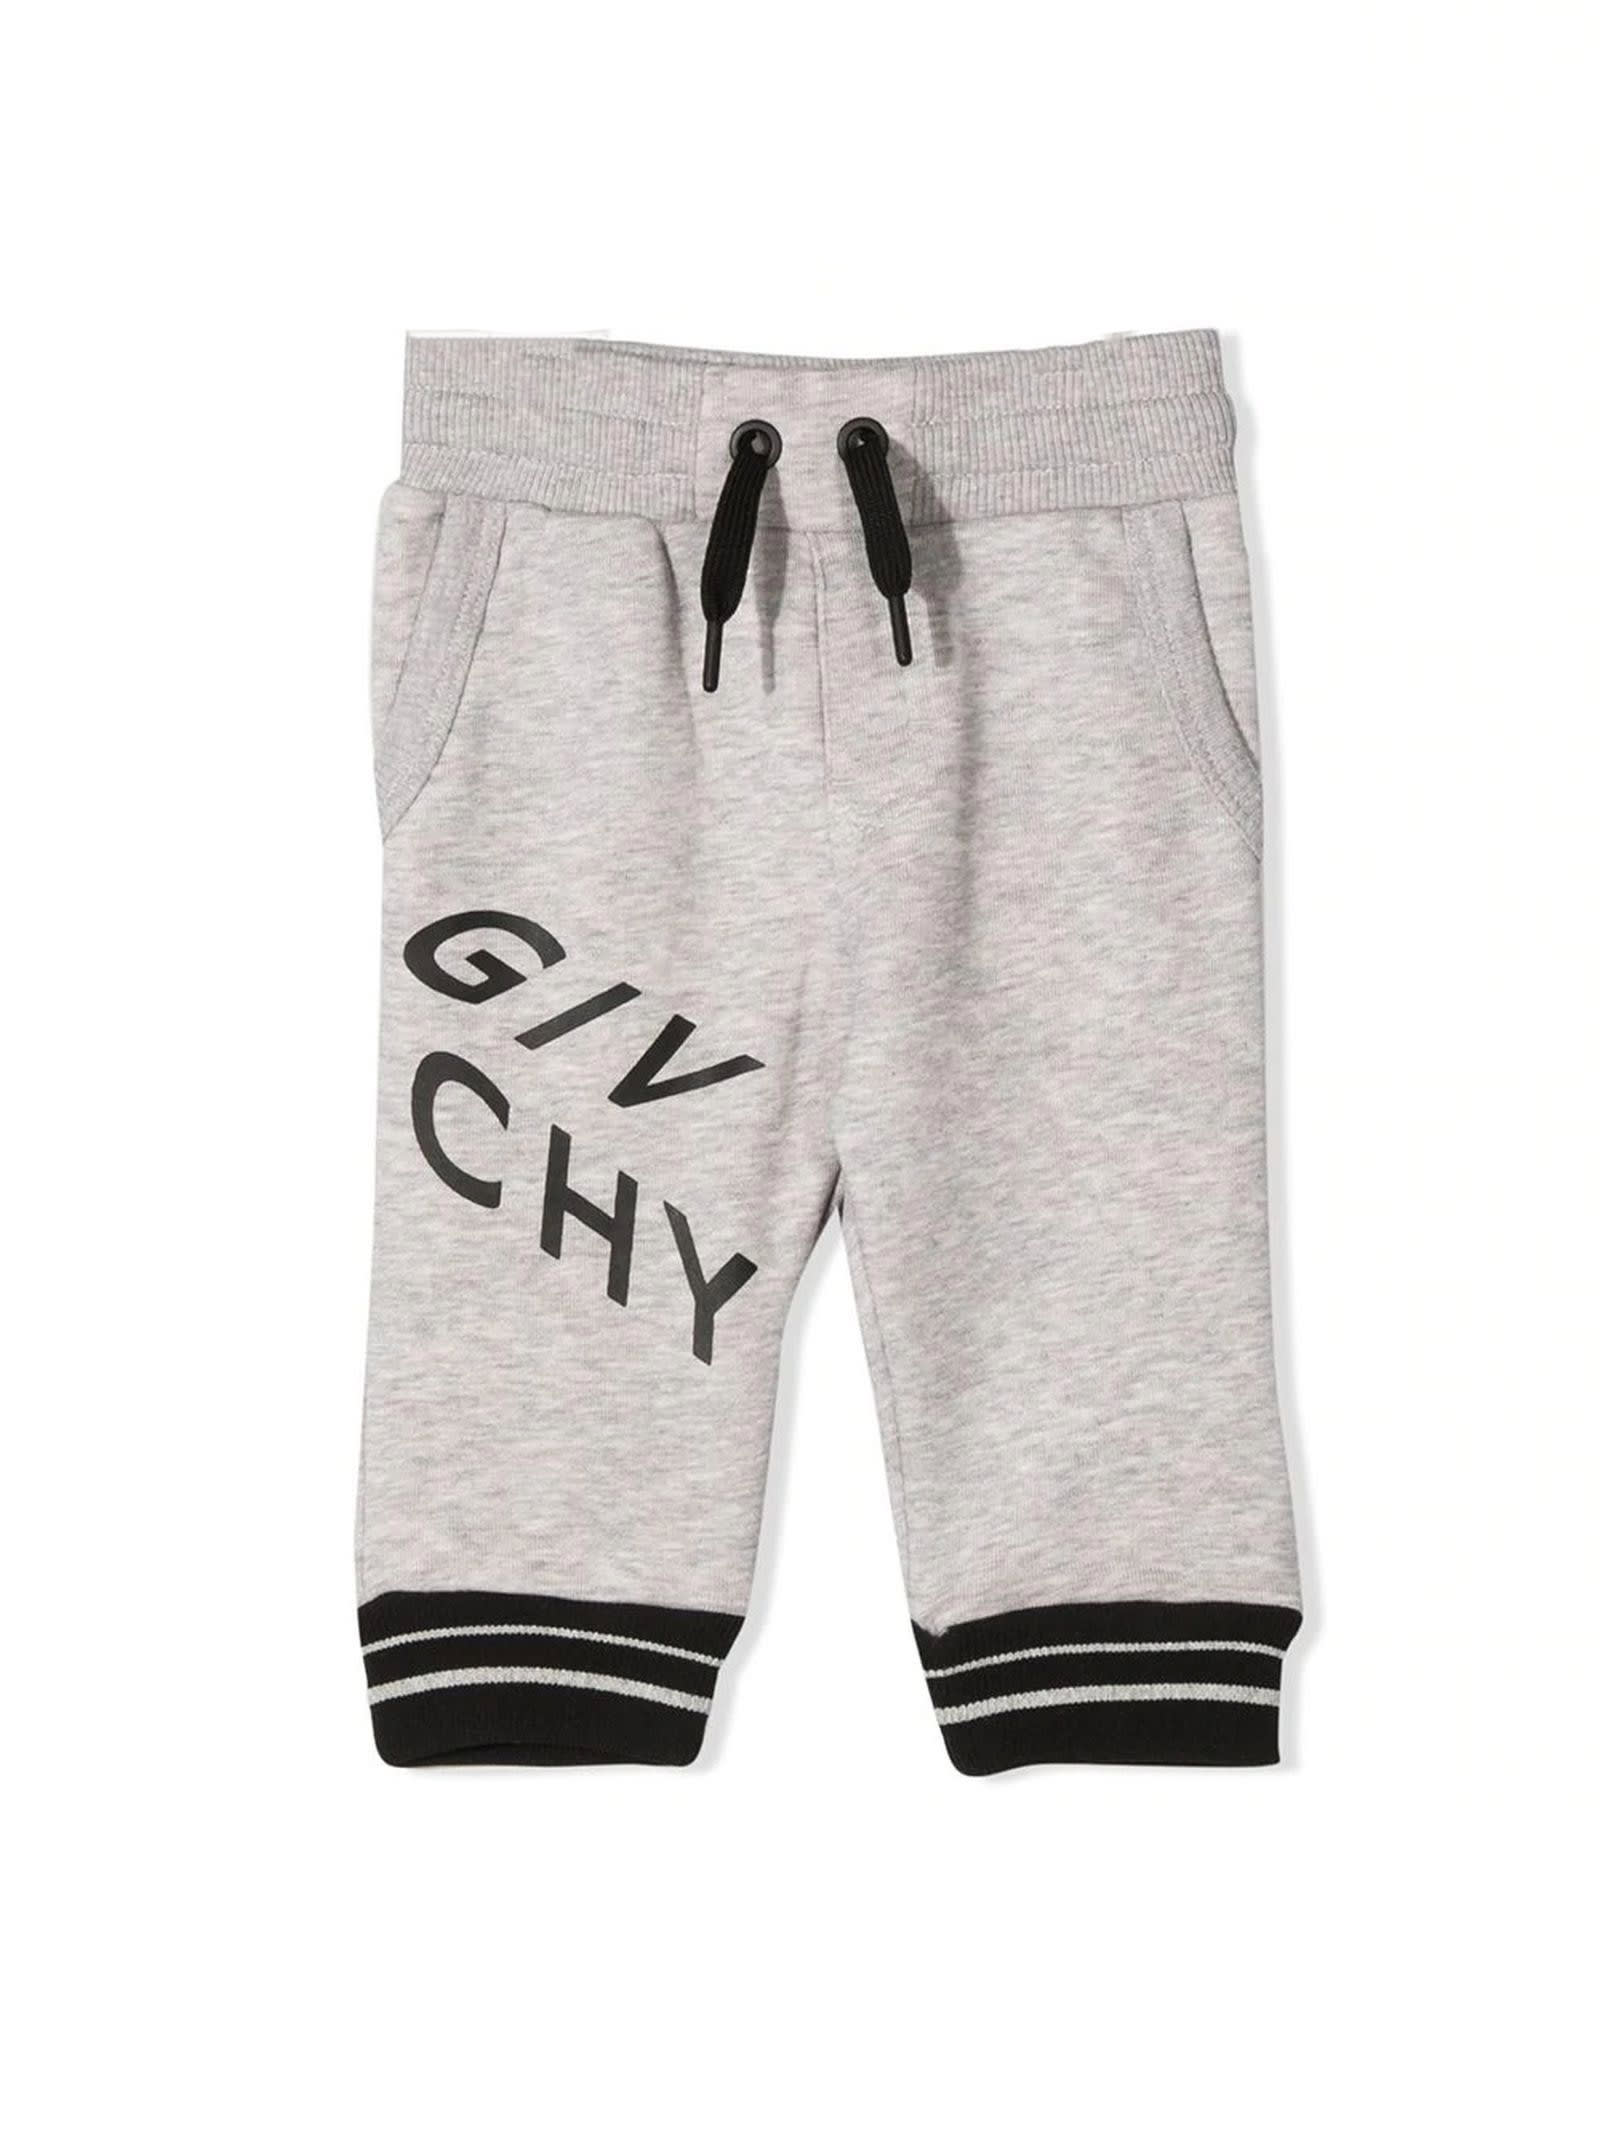 Givenchy Grey Cotton Track Pants